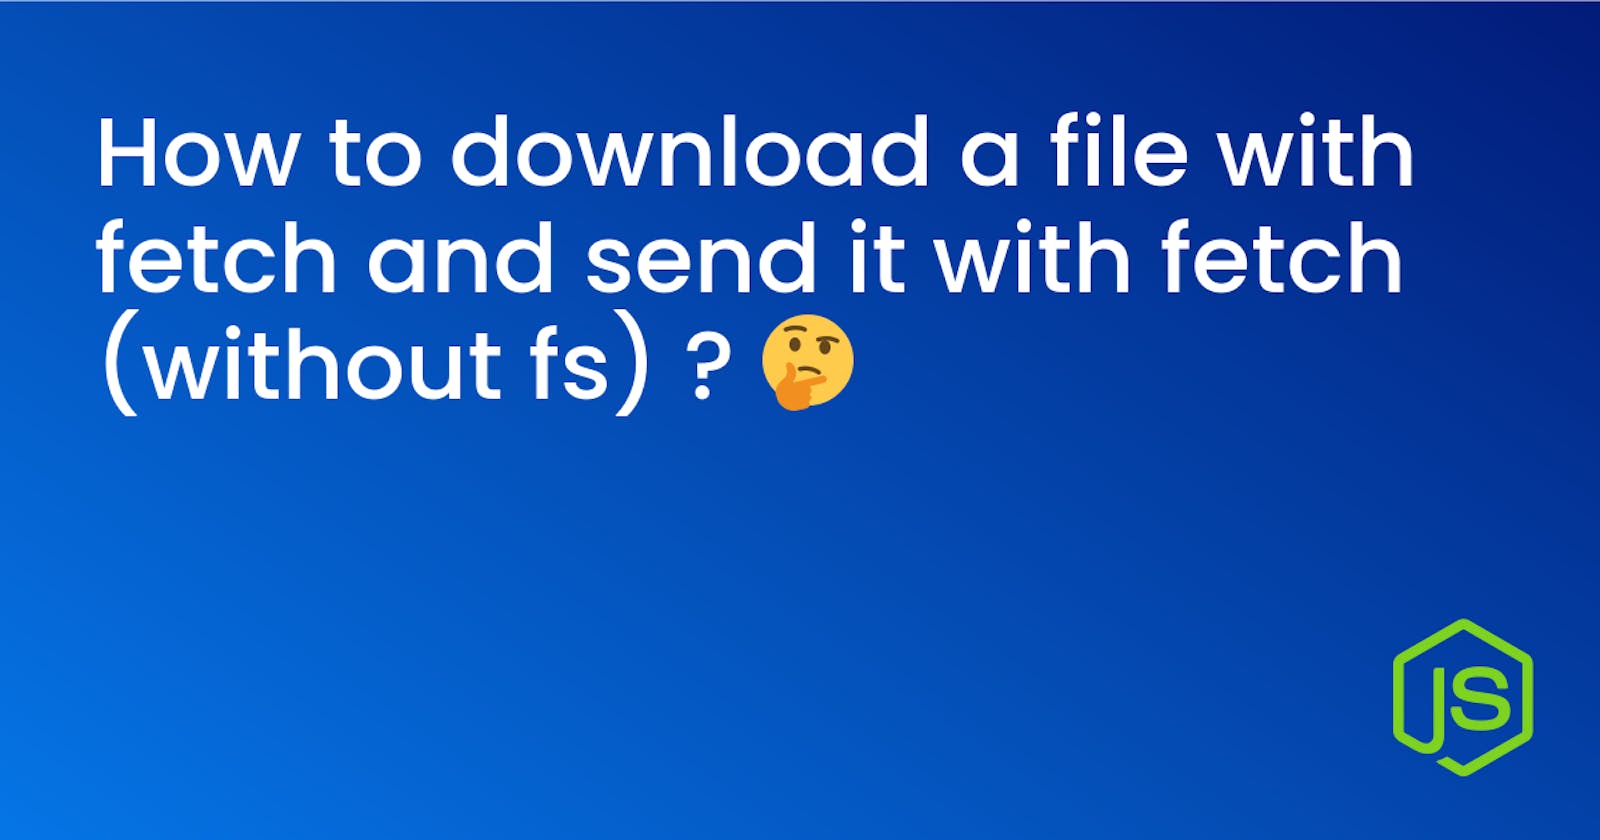 How to download a file with fetch and send it with fetch (without fs) ? 🤔